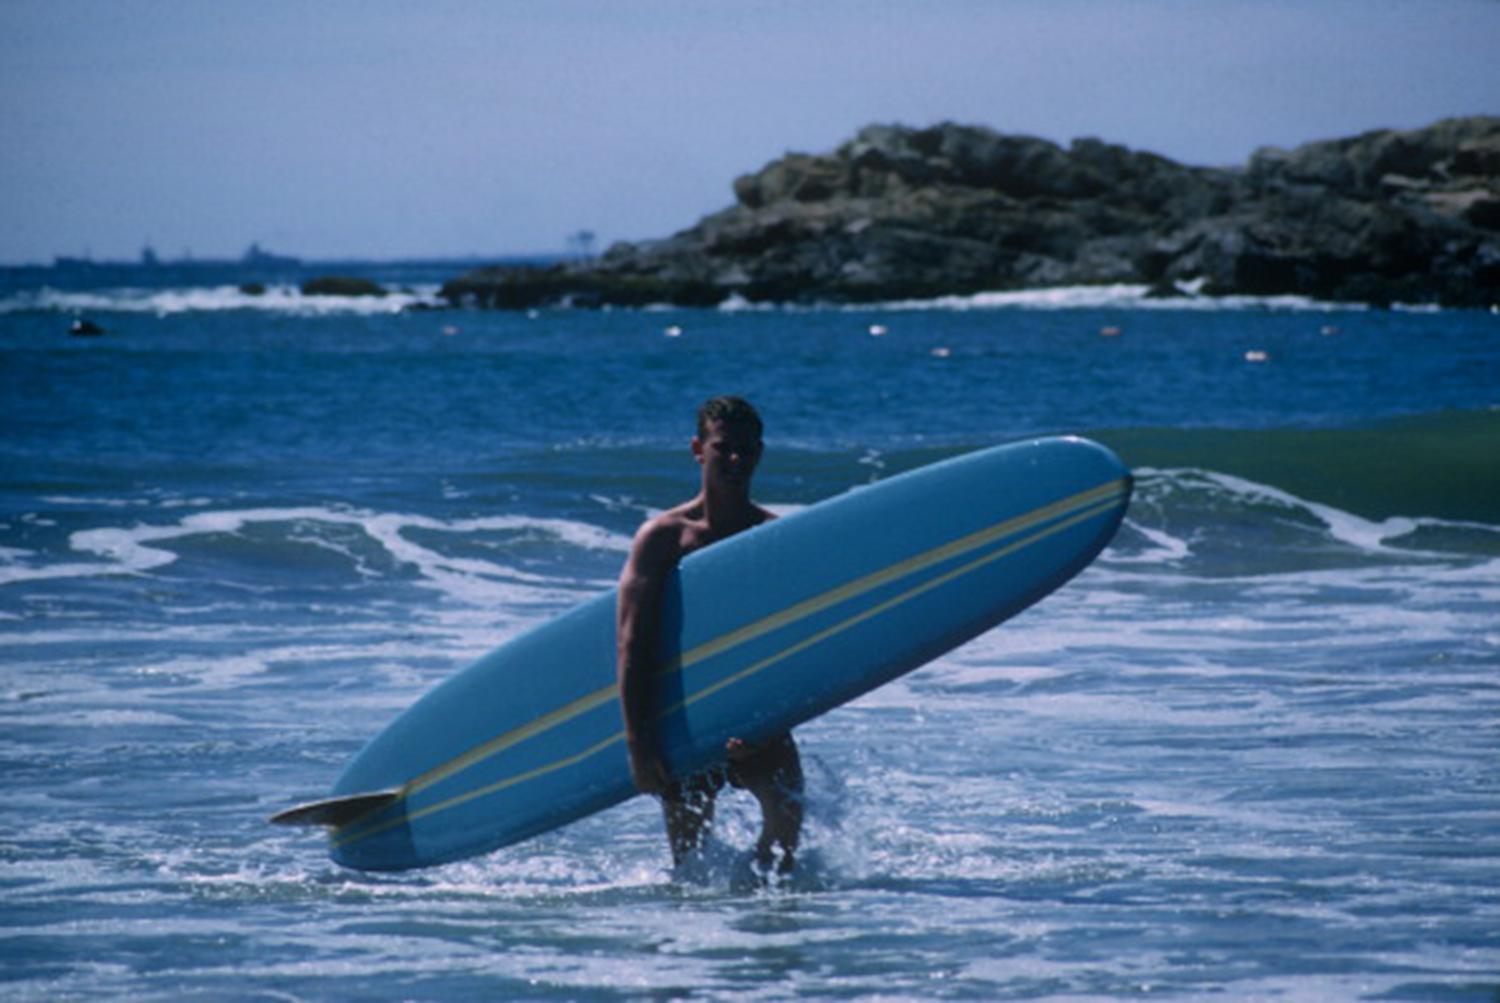 A surfer carrying his board at a Rhode Island beach, September 1965. (Photo by Slim Aarons/Getty Images)

Slim Aarons Estate Edition, Certificate of Authenticity included
Numbered and stamped by the Slim Aarons Estate

Modern estate edition with